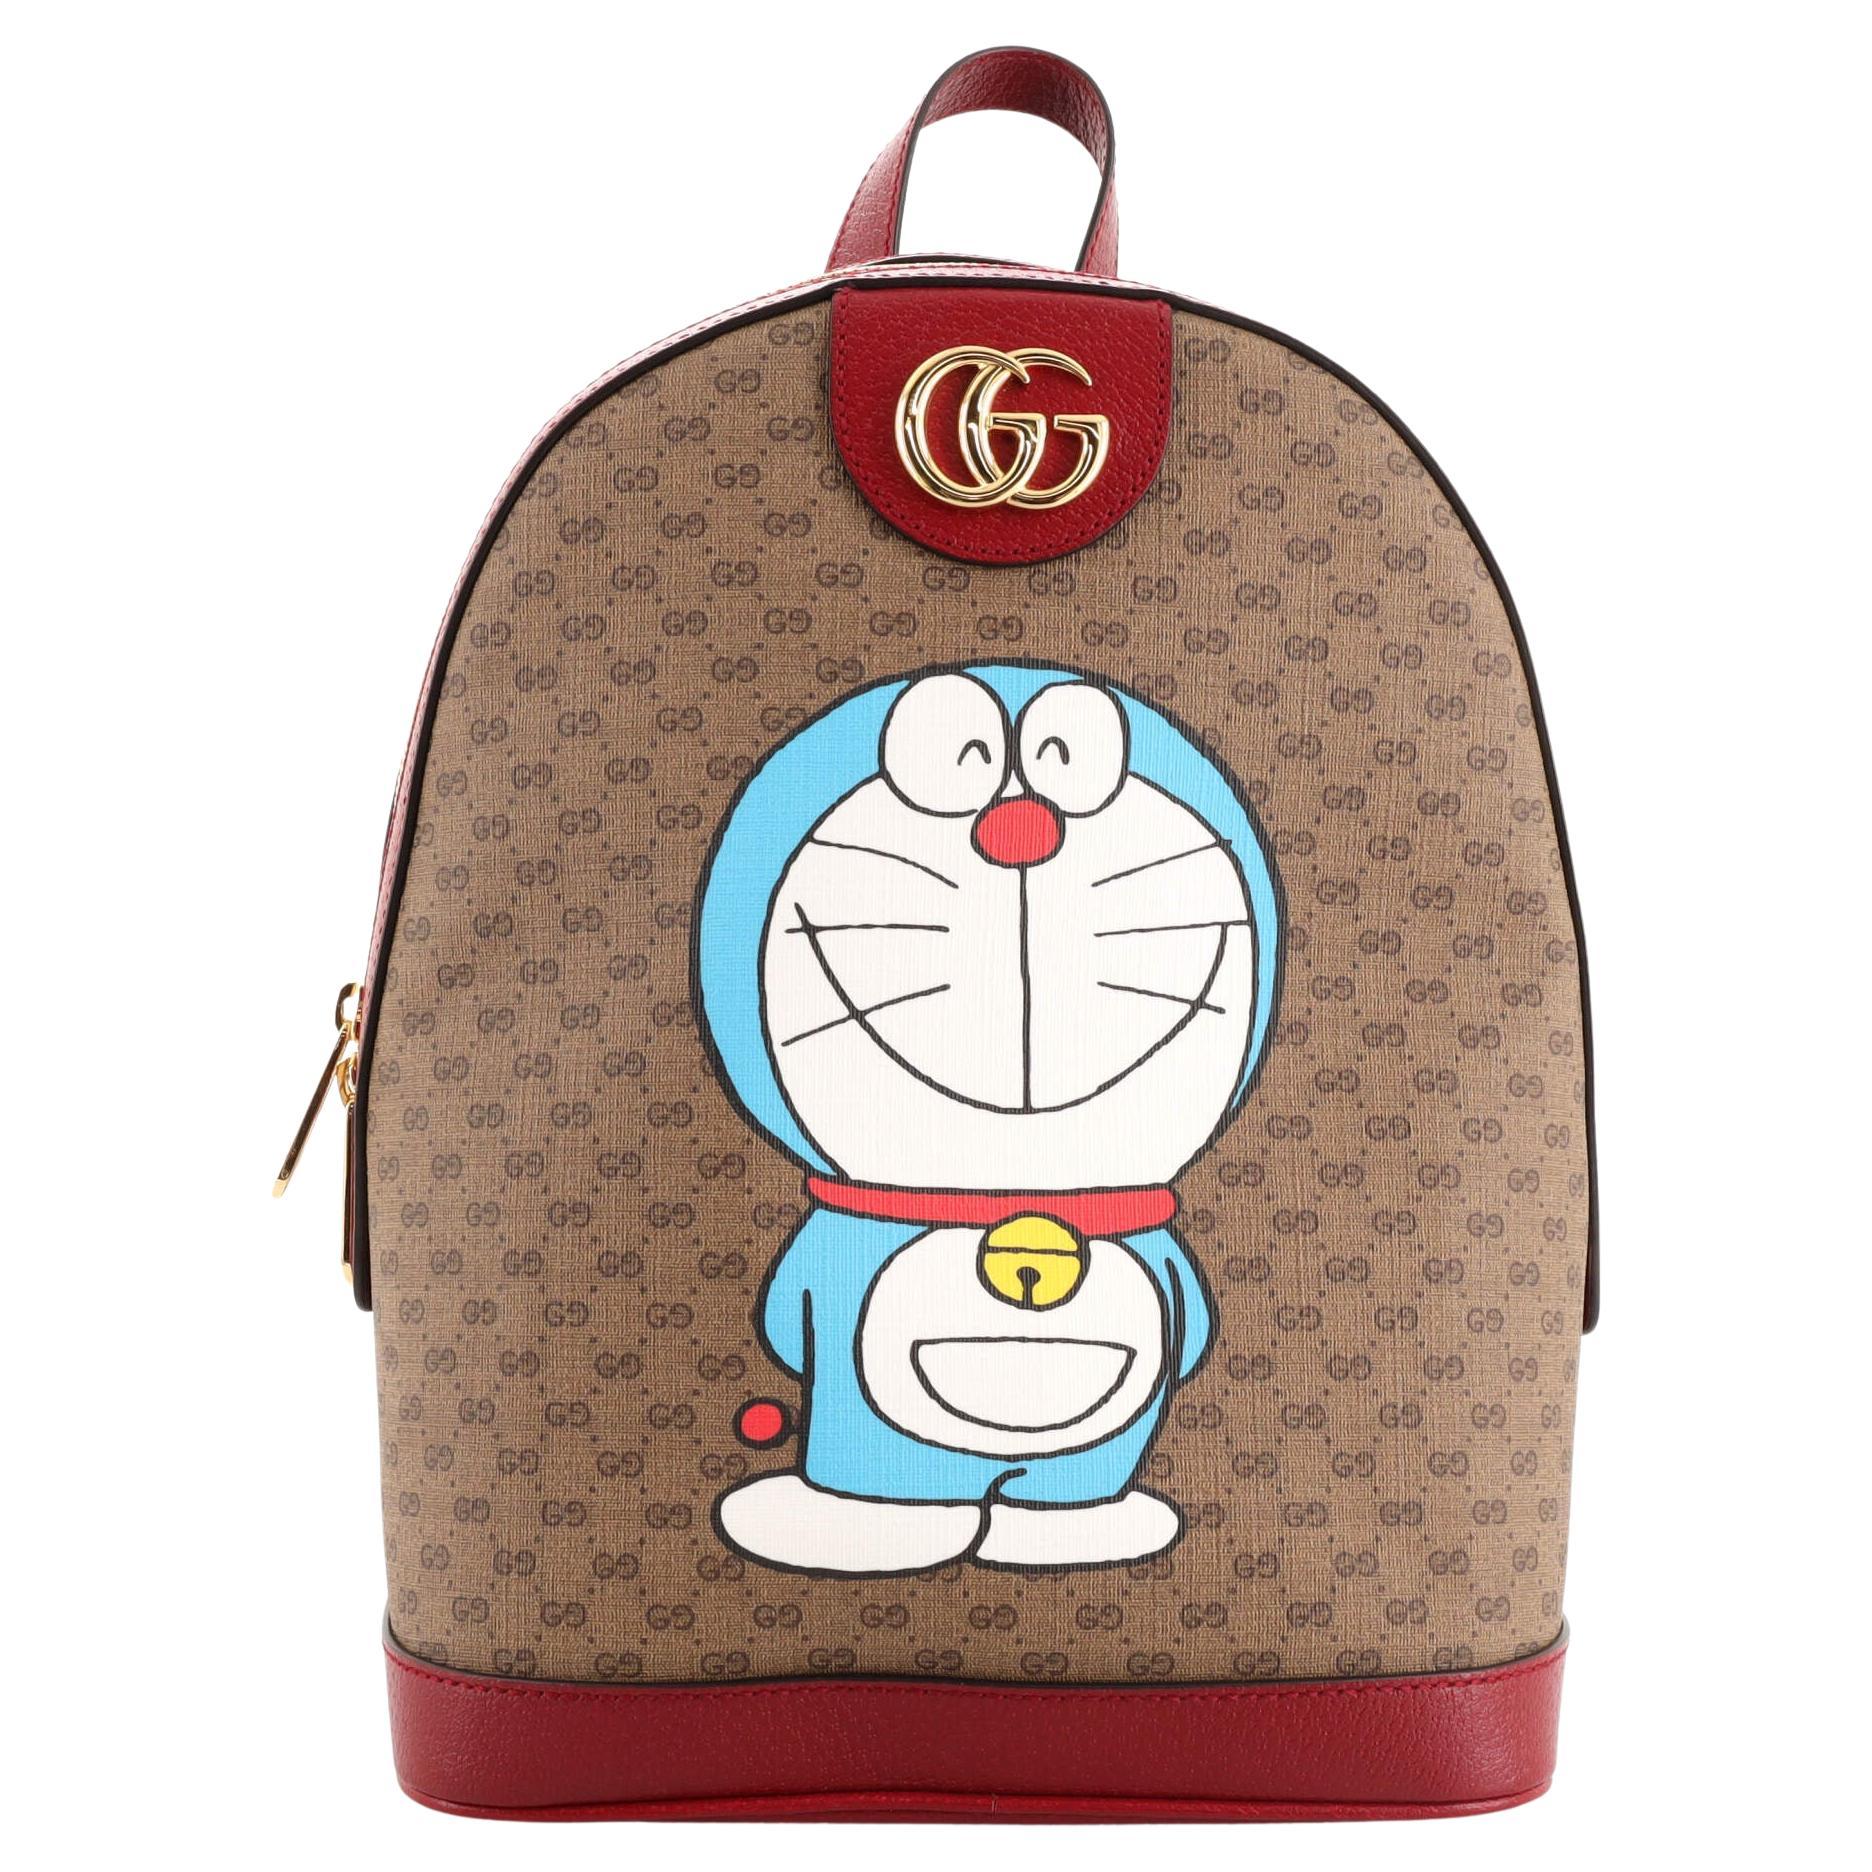 Gucci Brown Coated Canvas and Red Leather Doraemon Purse Box Gold Hardware, 2021 (Like New), Red/Brown Womens Handbag